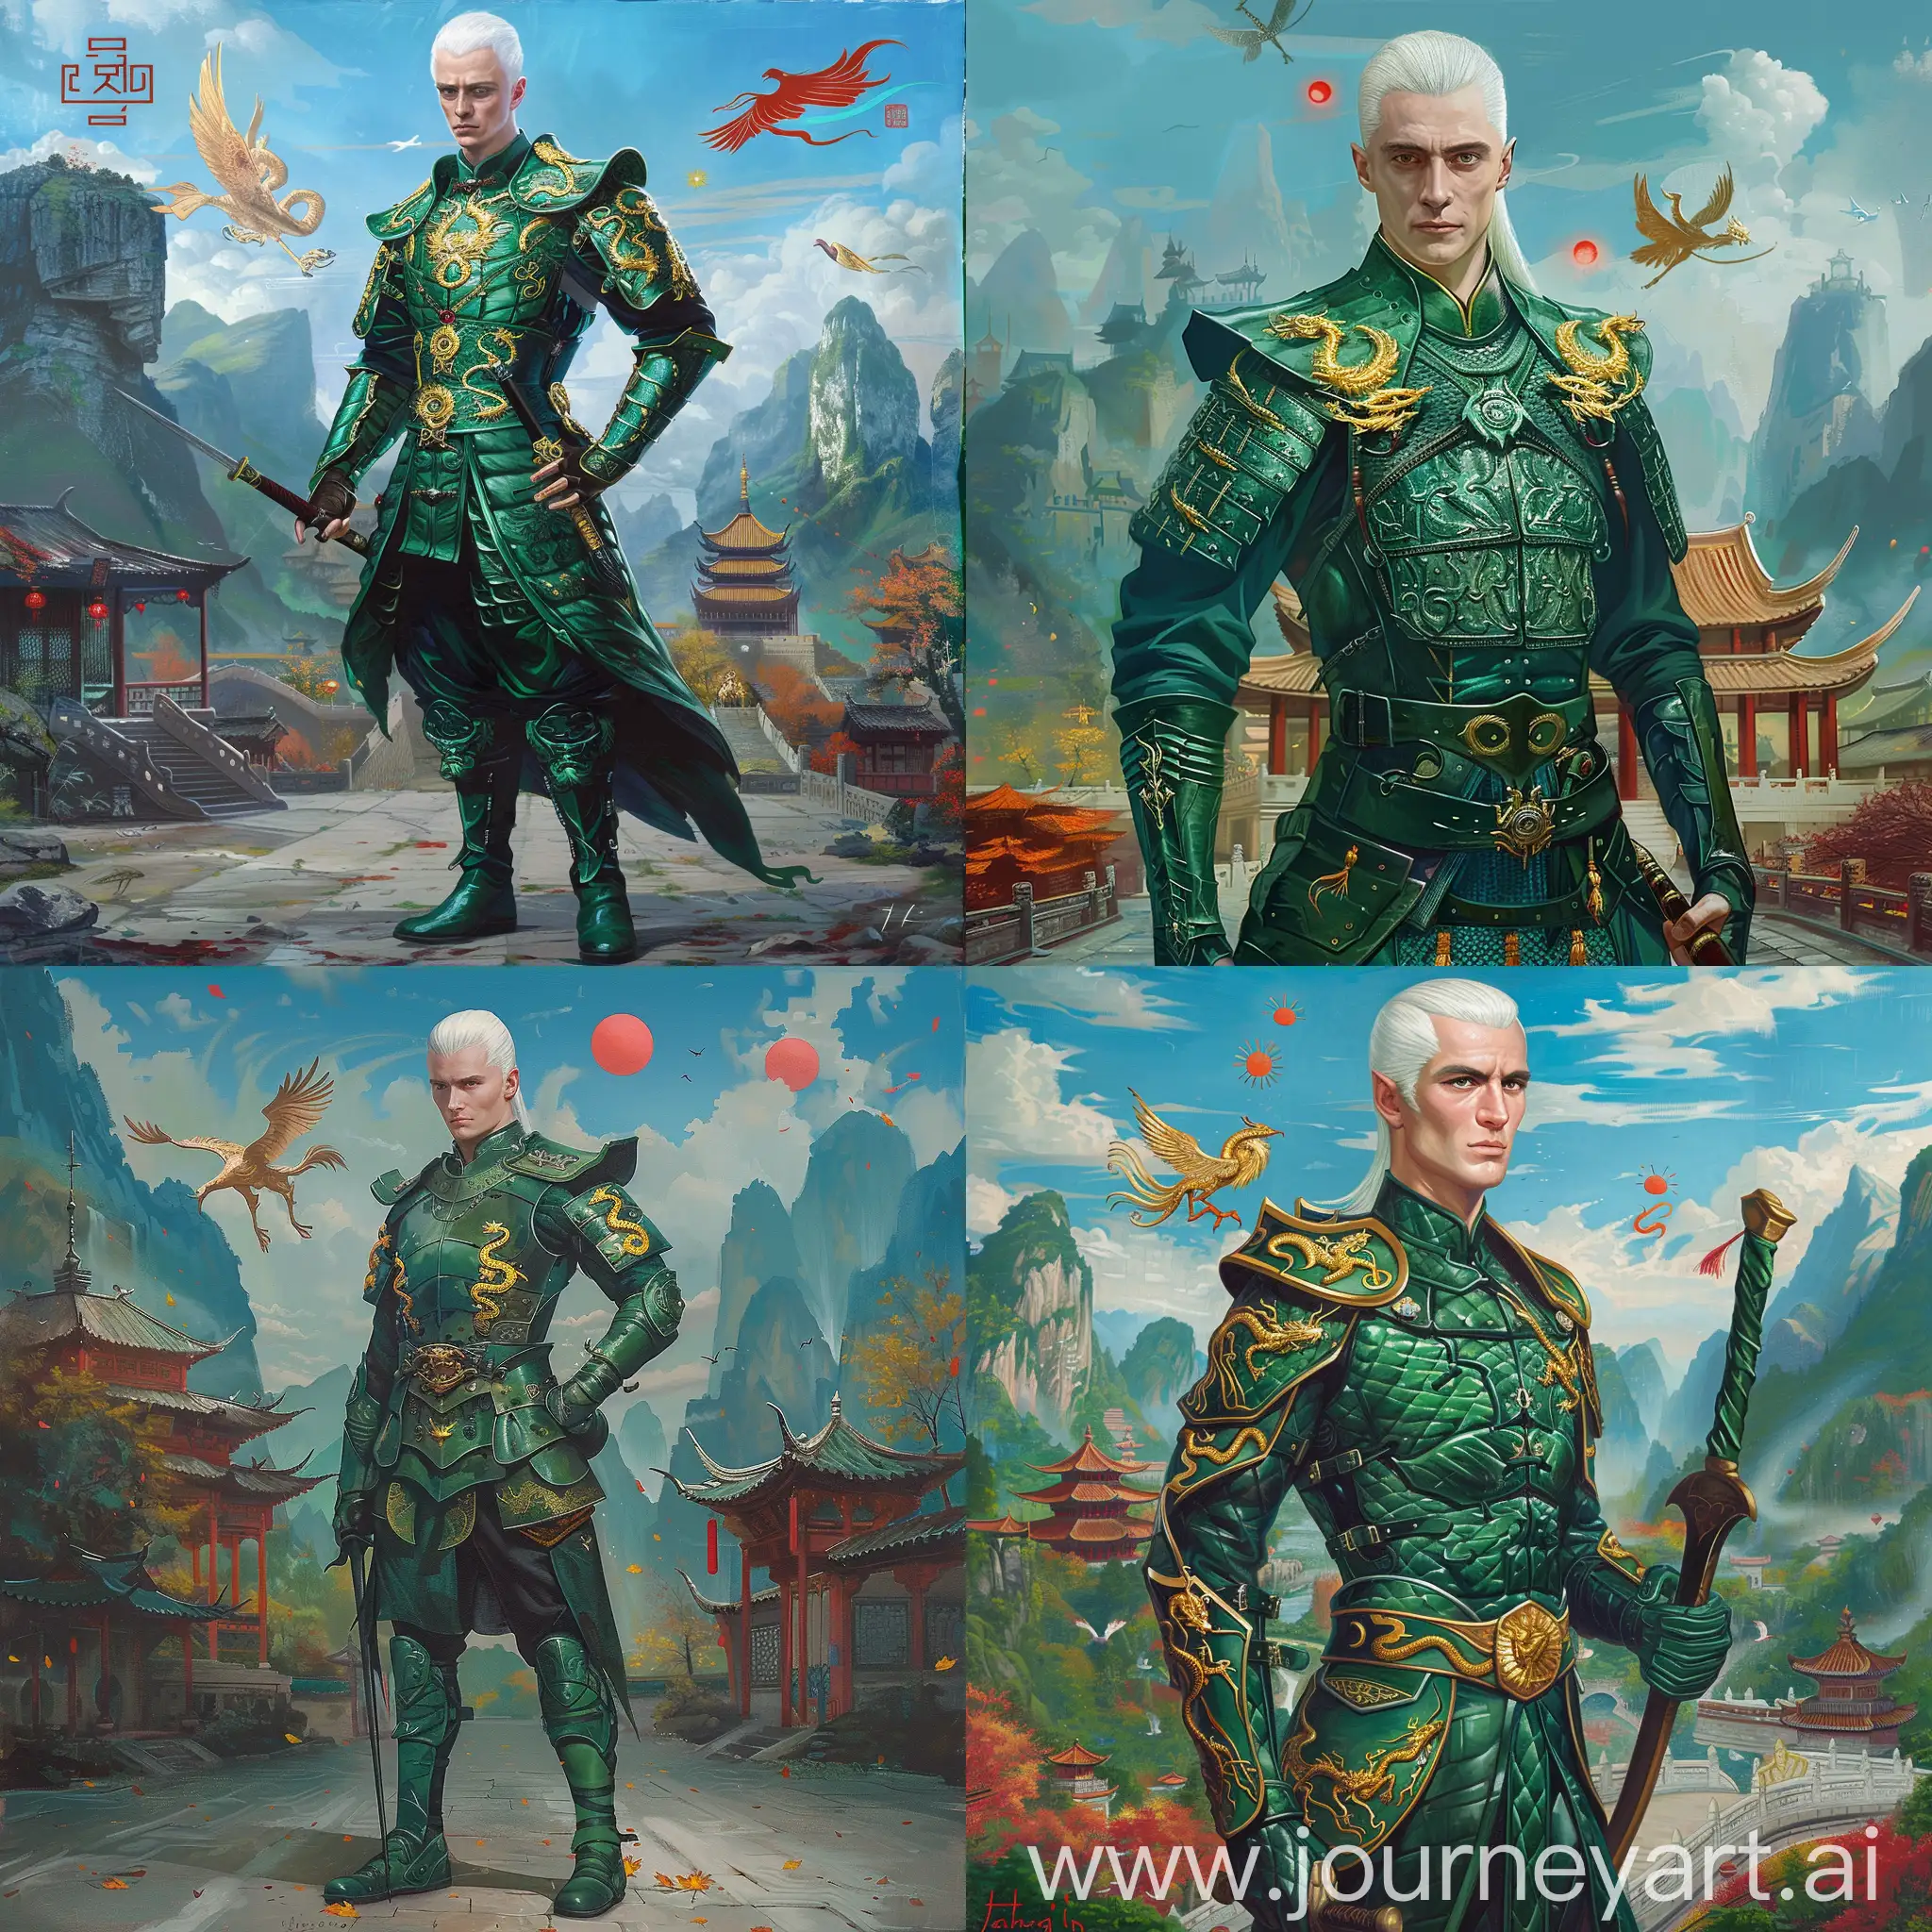 Sleek-Draco-Malfoy-in-Ornate-Chinese-Armor-with-Sword-Against-Guilin-Temple-Backdrop